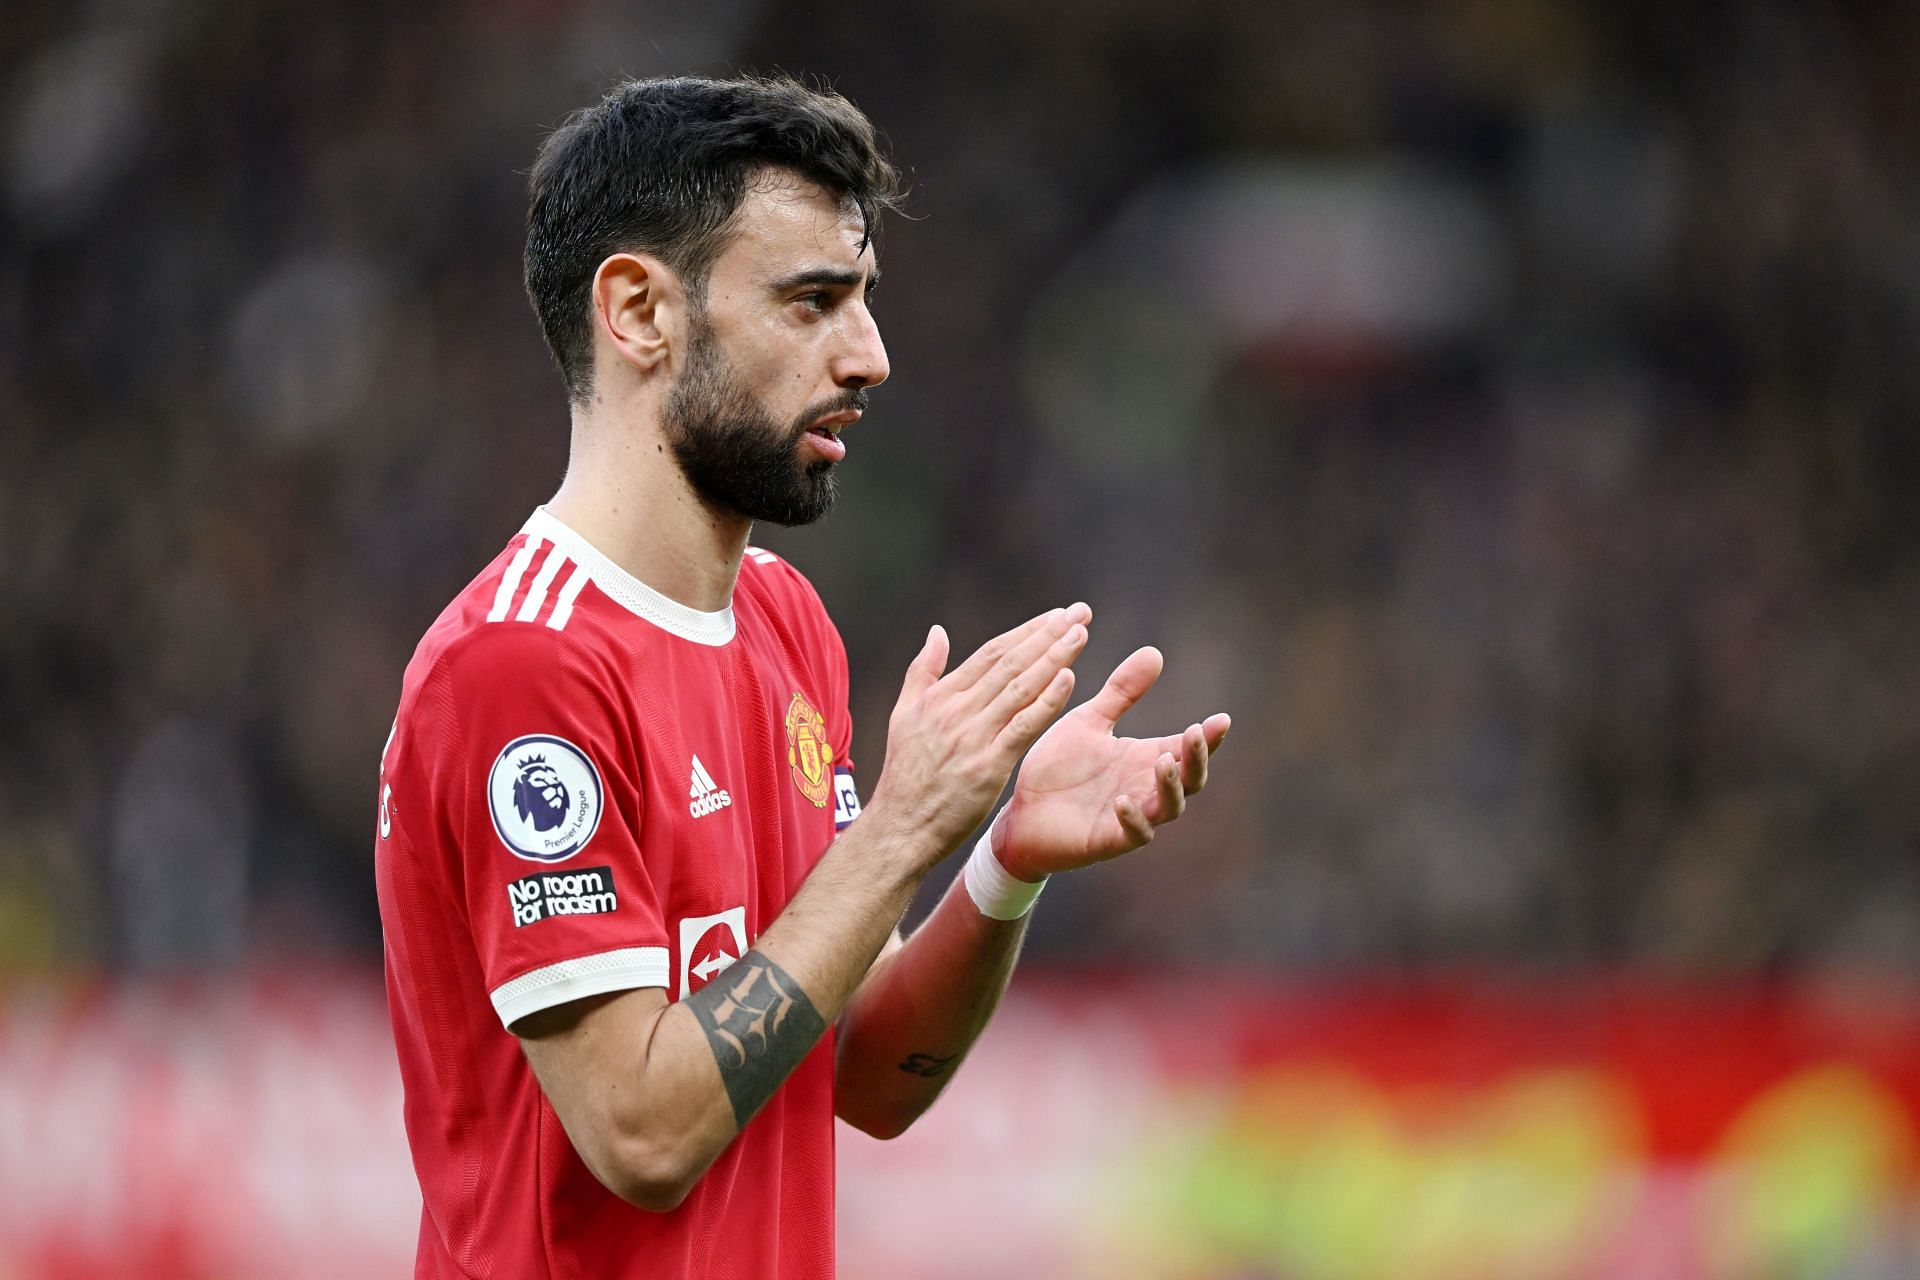 Bruno Fernandes has been outstanding since arriving at Old Trafford.